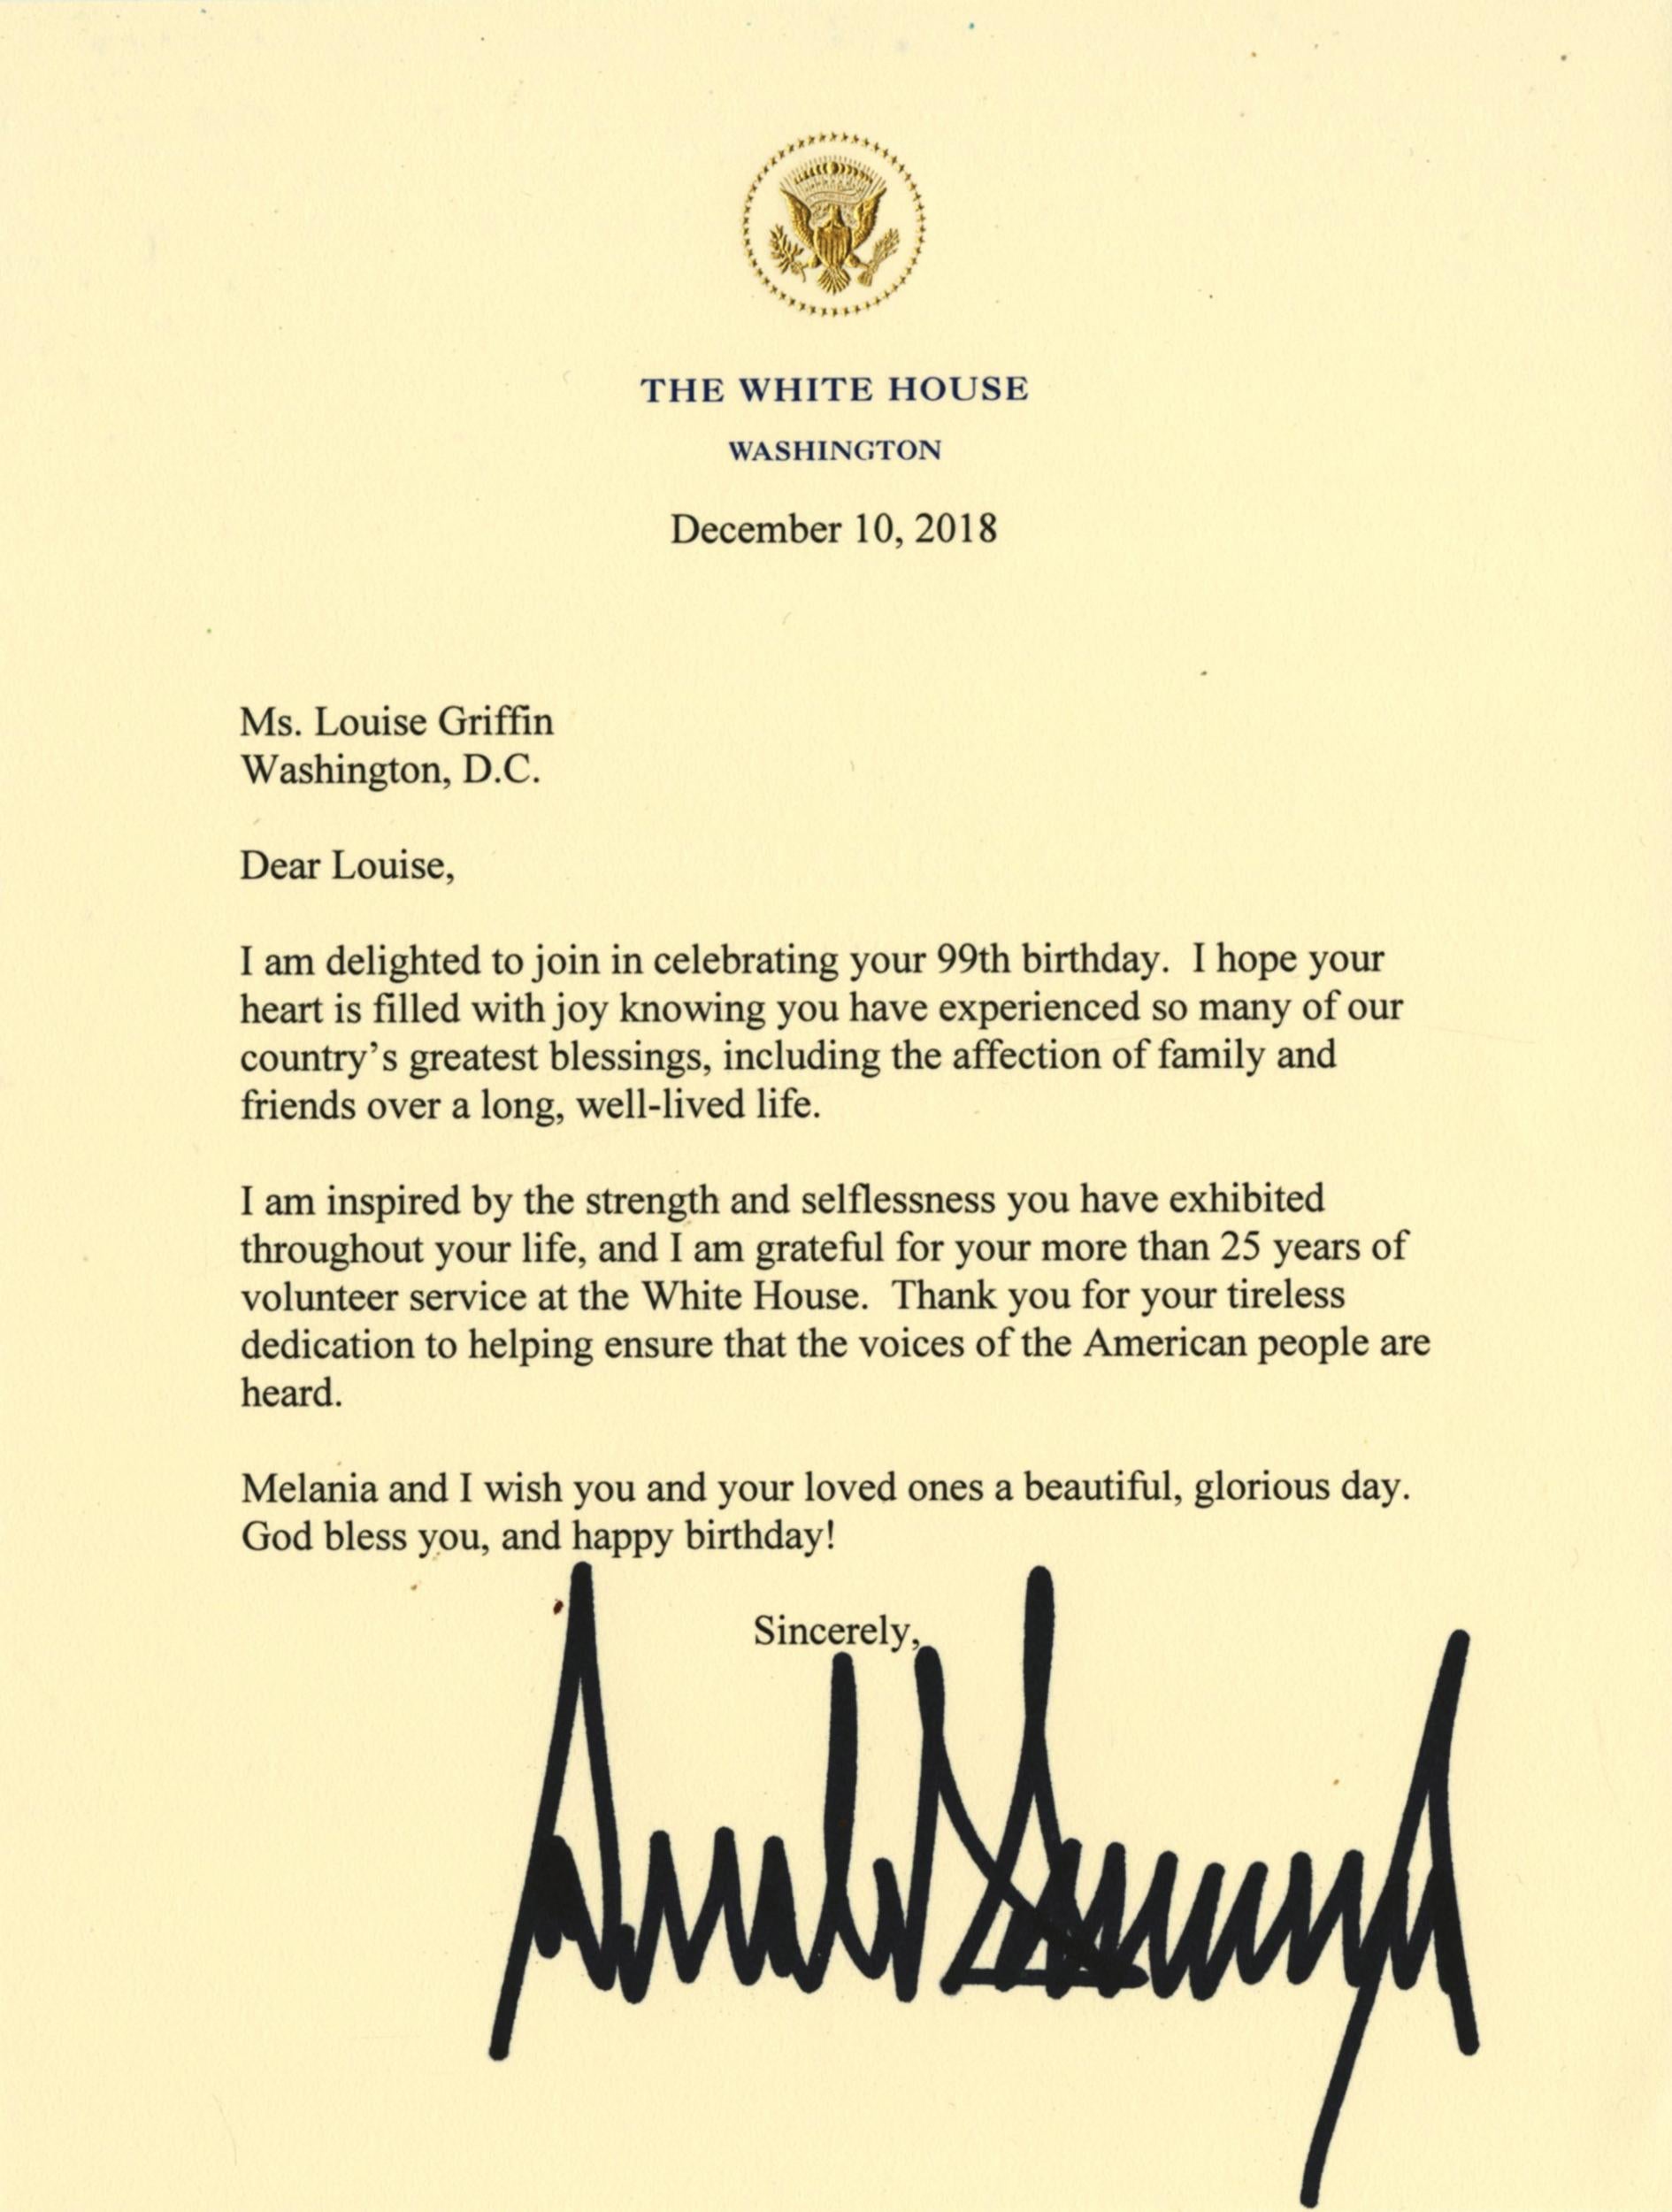 Louise Griffin’s birthday letter from Donald Trump